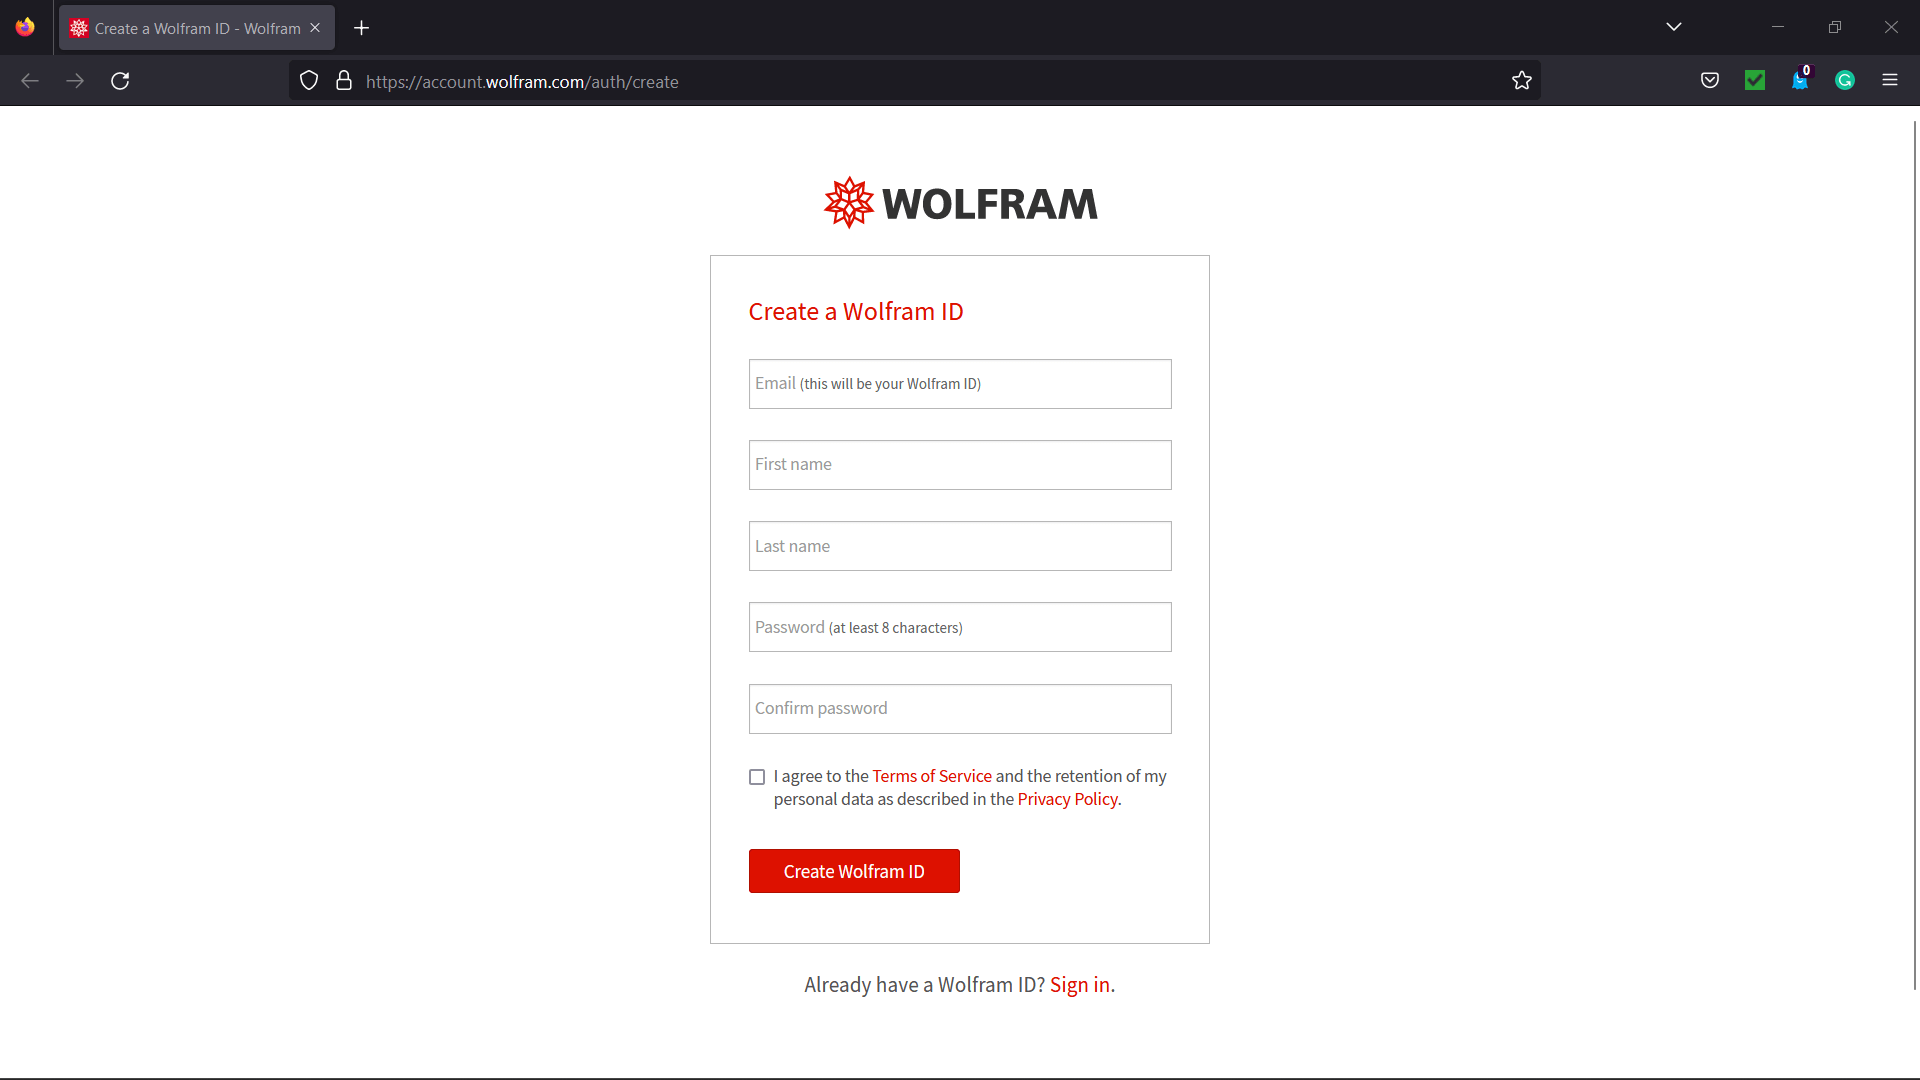 GUI Assistant using Wolfram Alpha API in Python